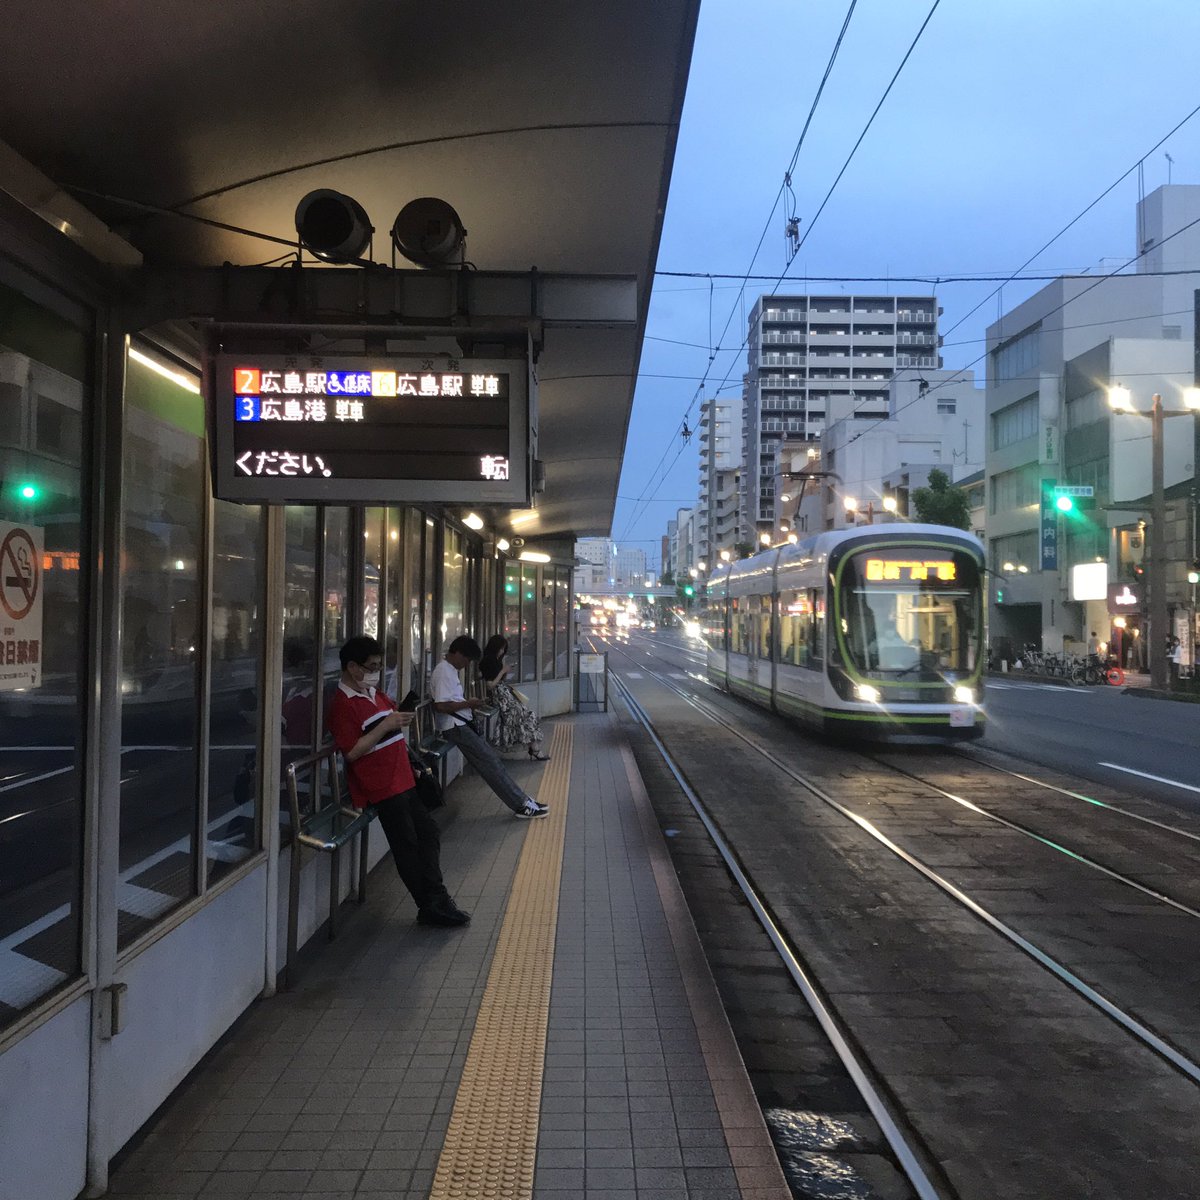 Hiroshima’s streetcar system is awesome